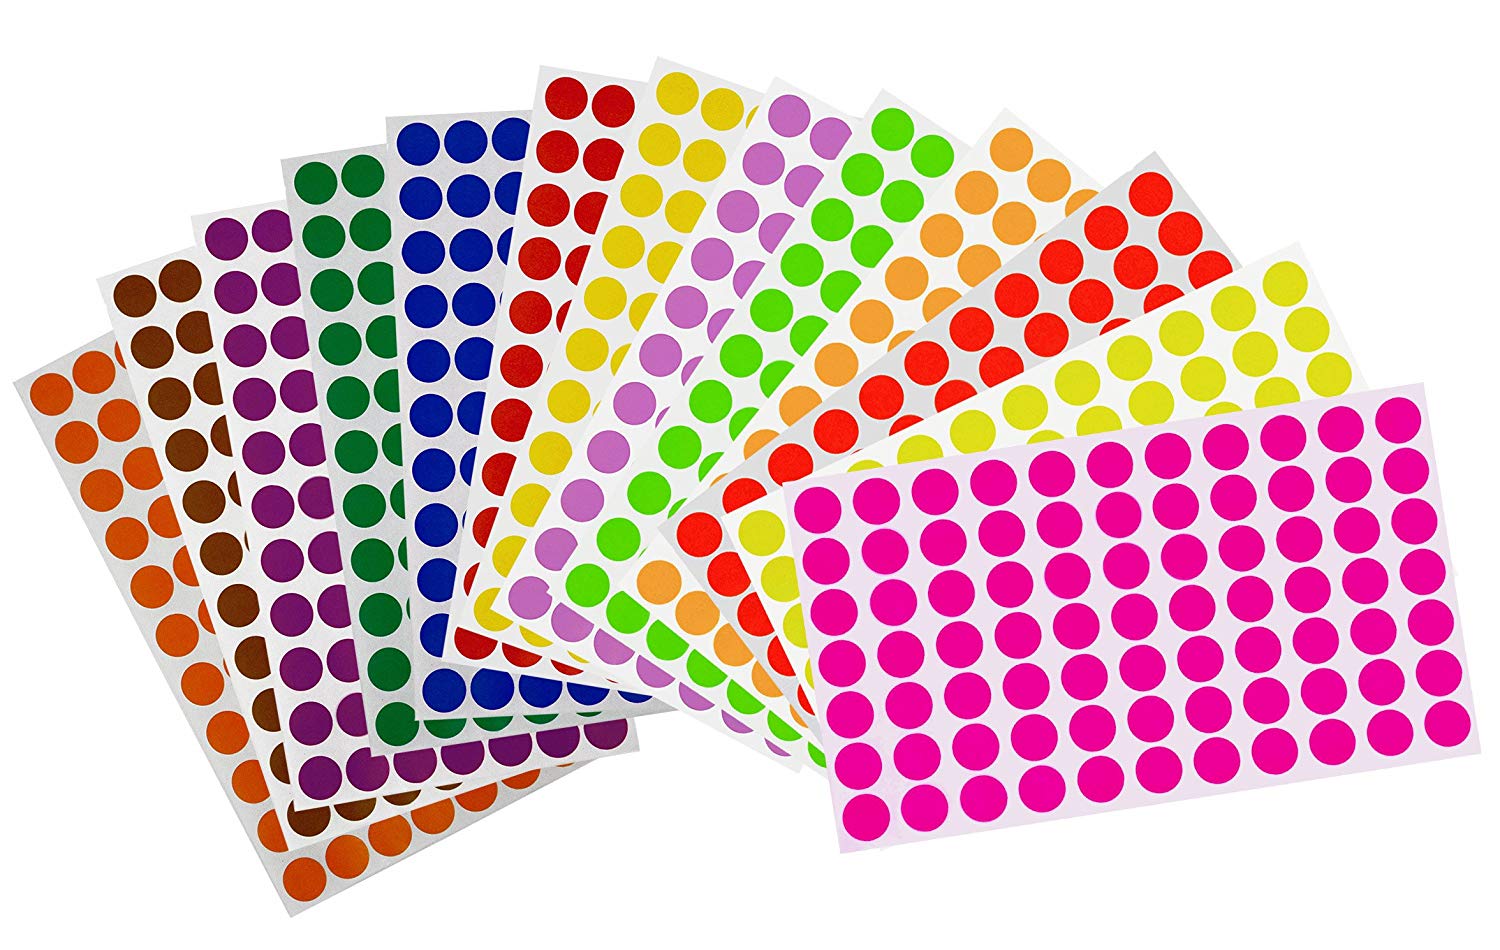 Royal Green Dot Stickers ~ 5/8 inch Classic Colors 15mm 1540 / Black